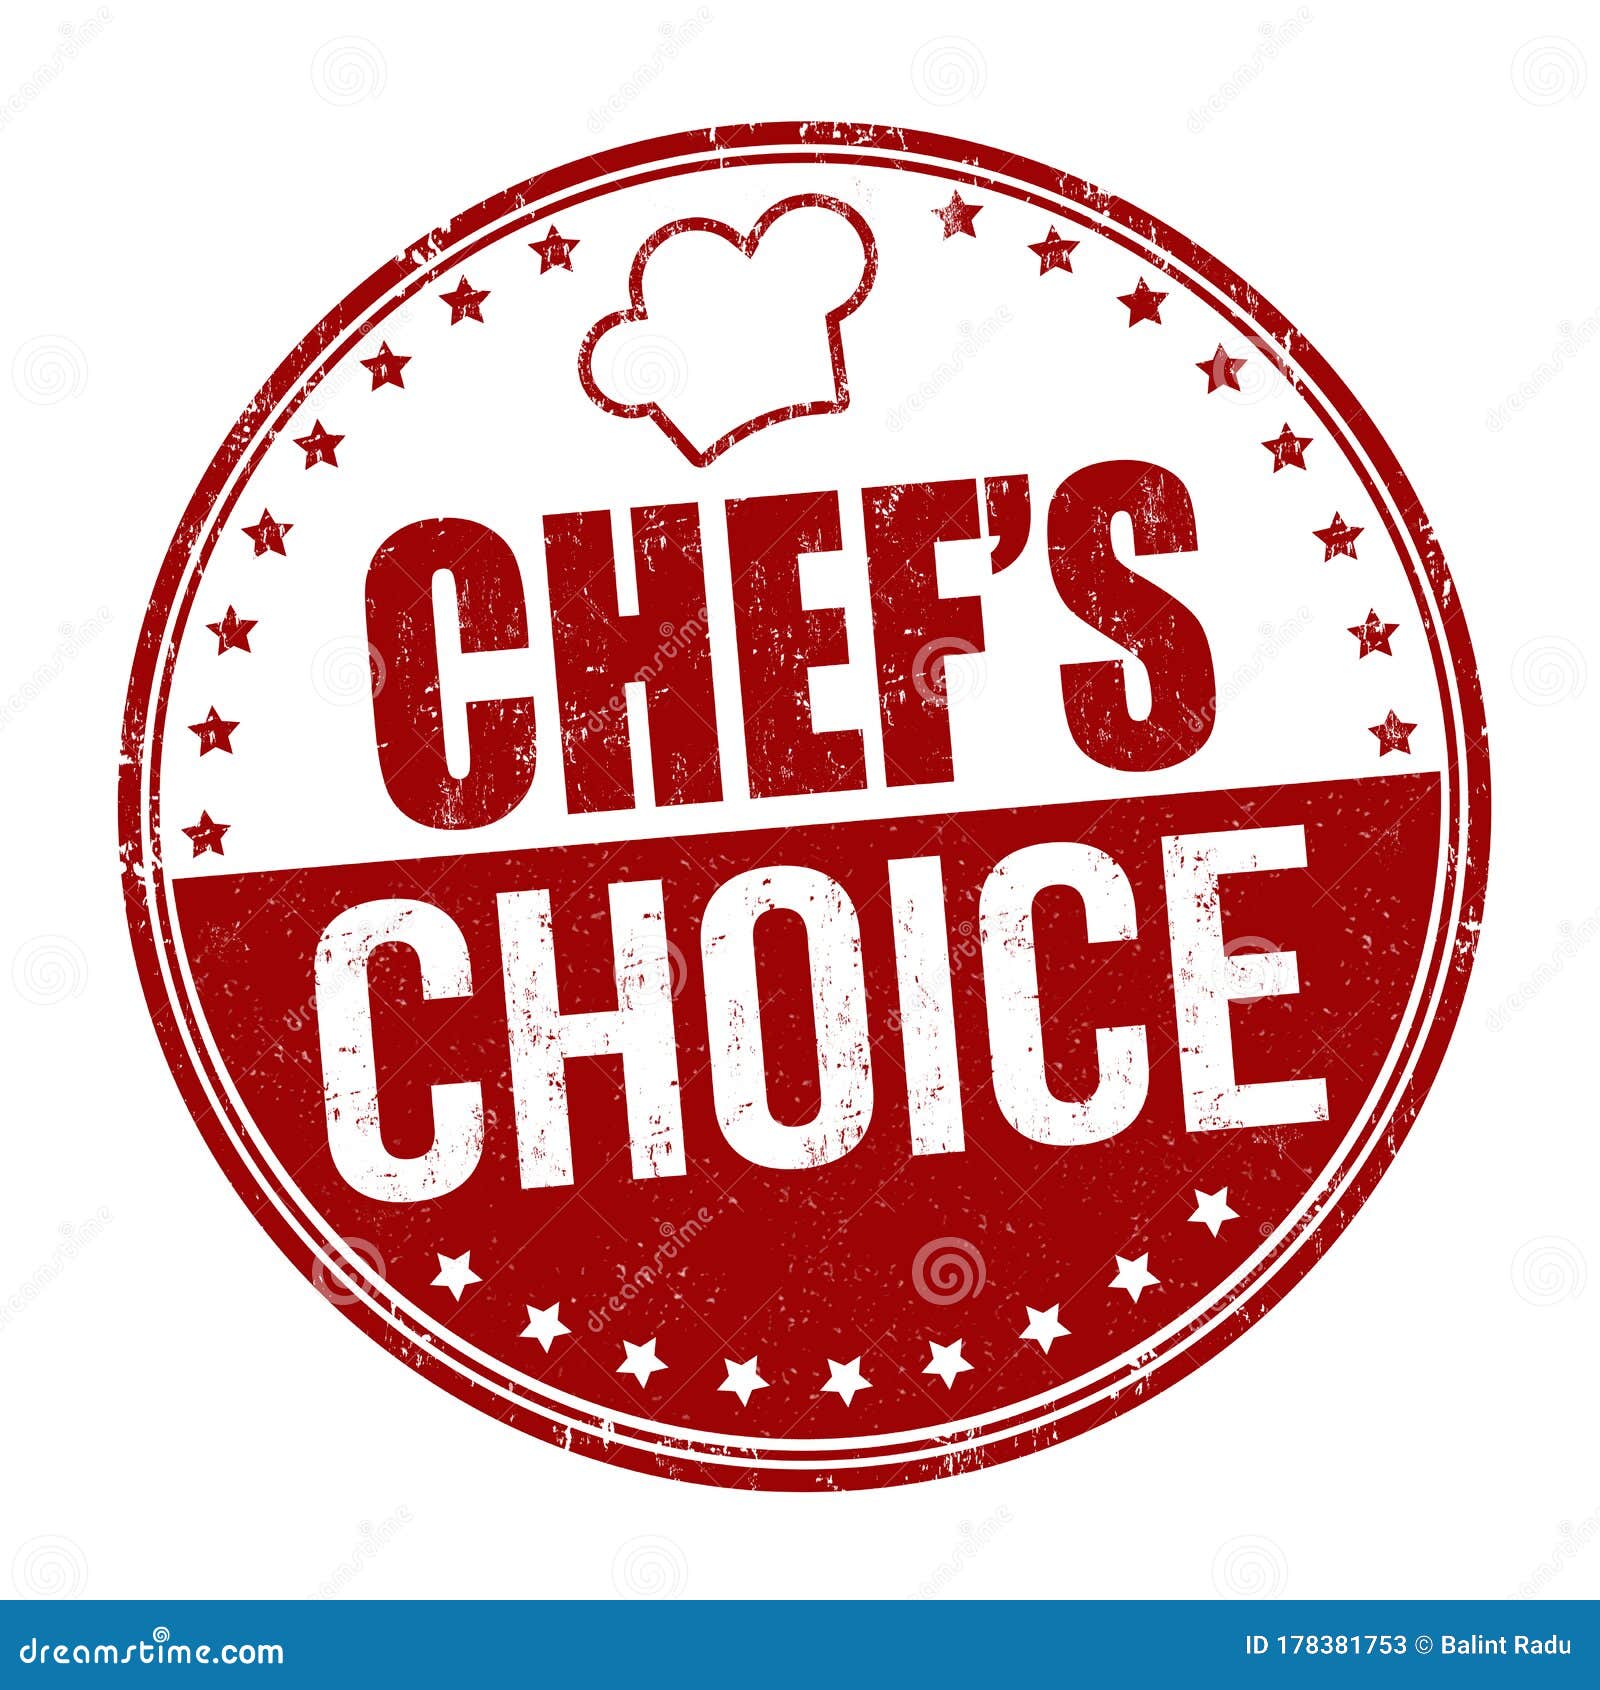 https://thumbs.dreamstime.com/z/chef-s-choice-grunge-rubber-stamp-white-background-vector-illustration-178381753.jpg